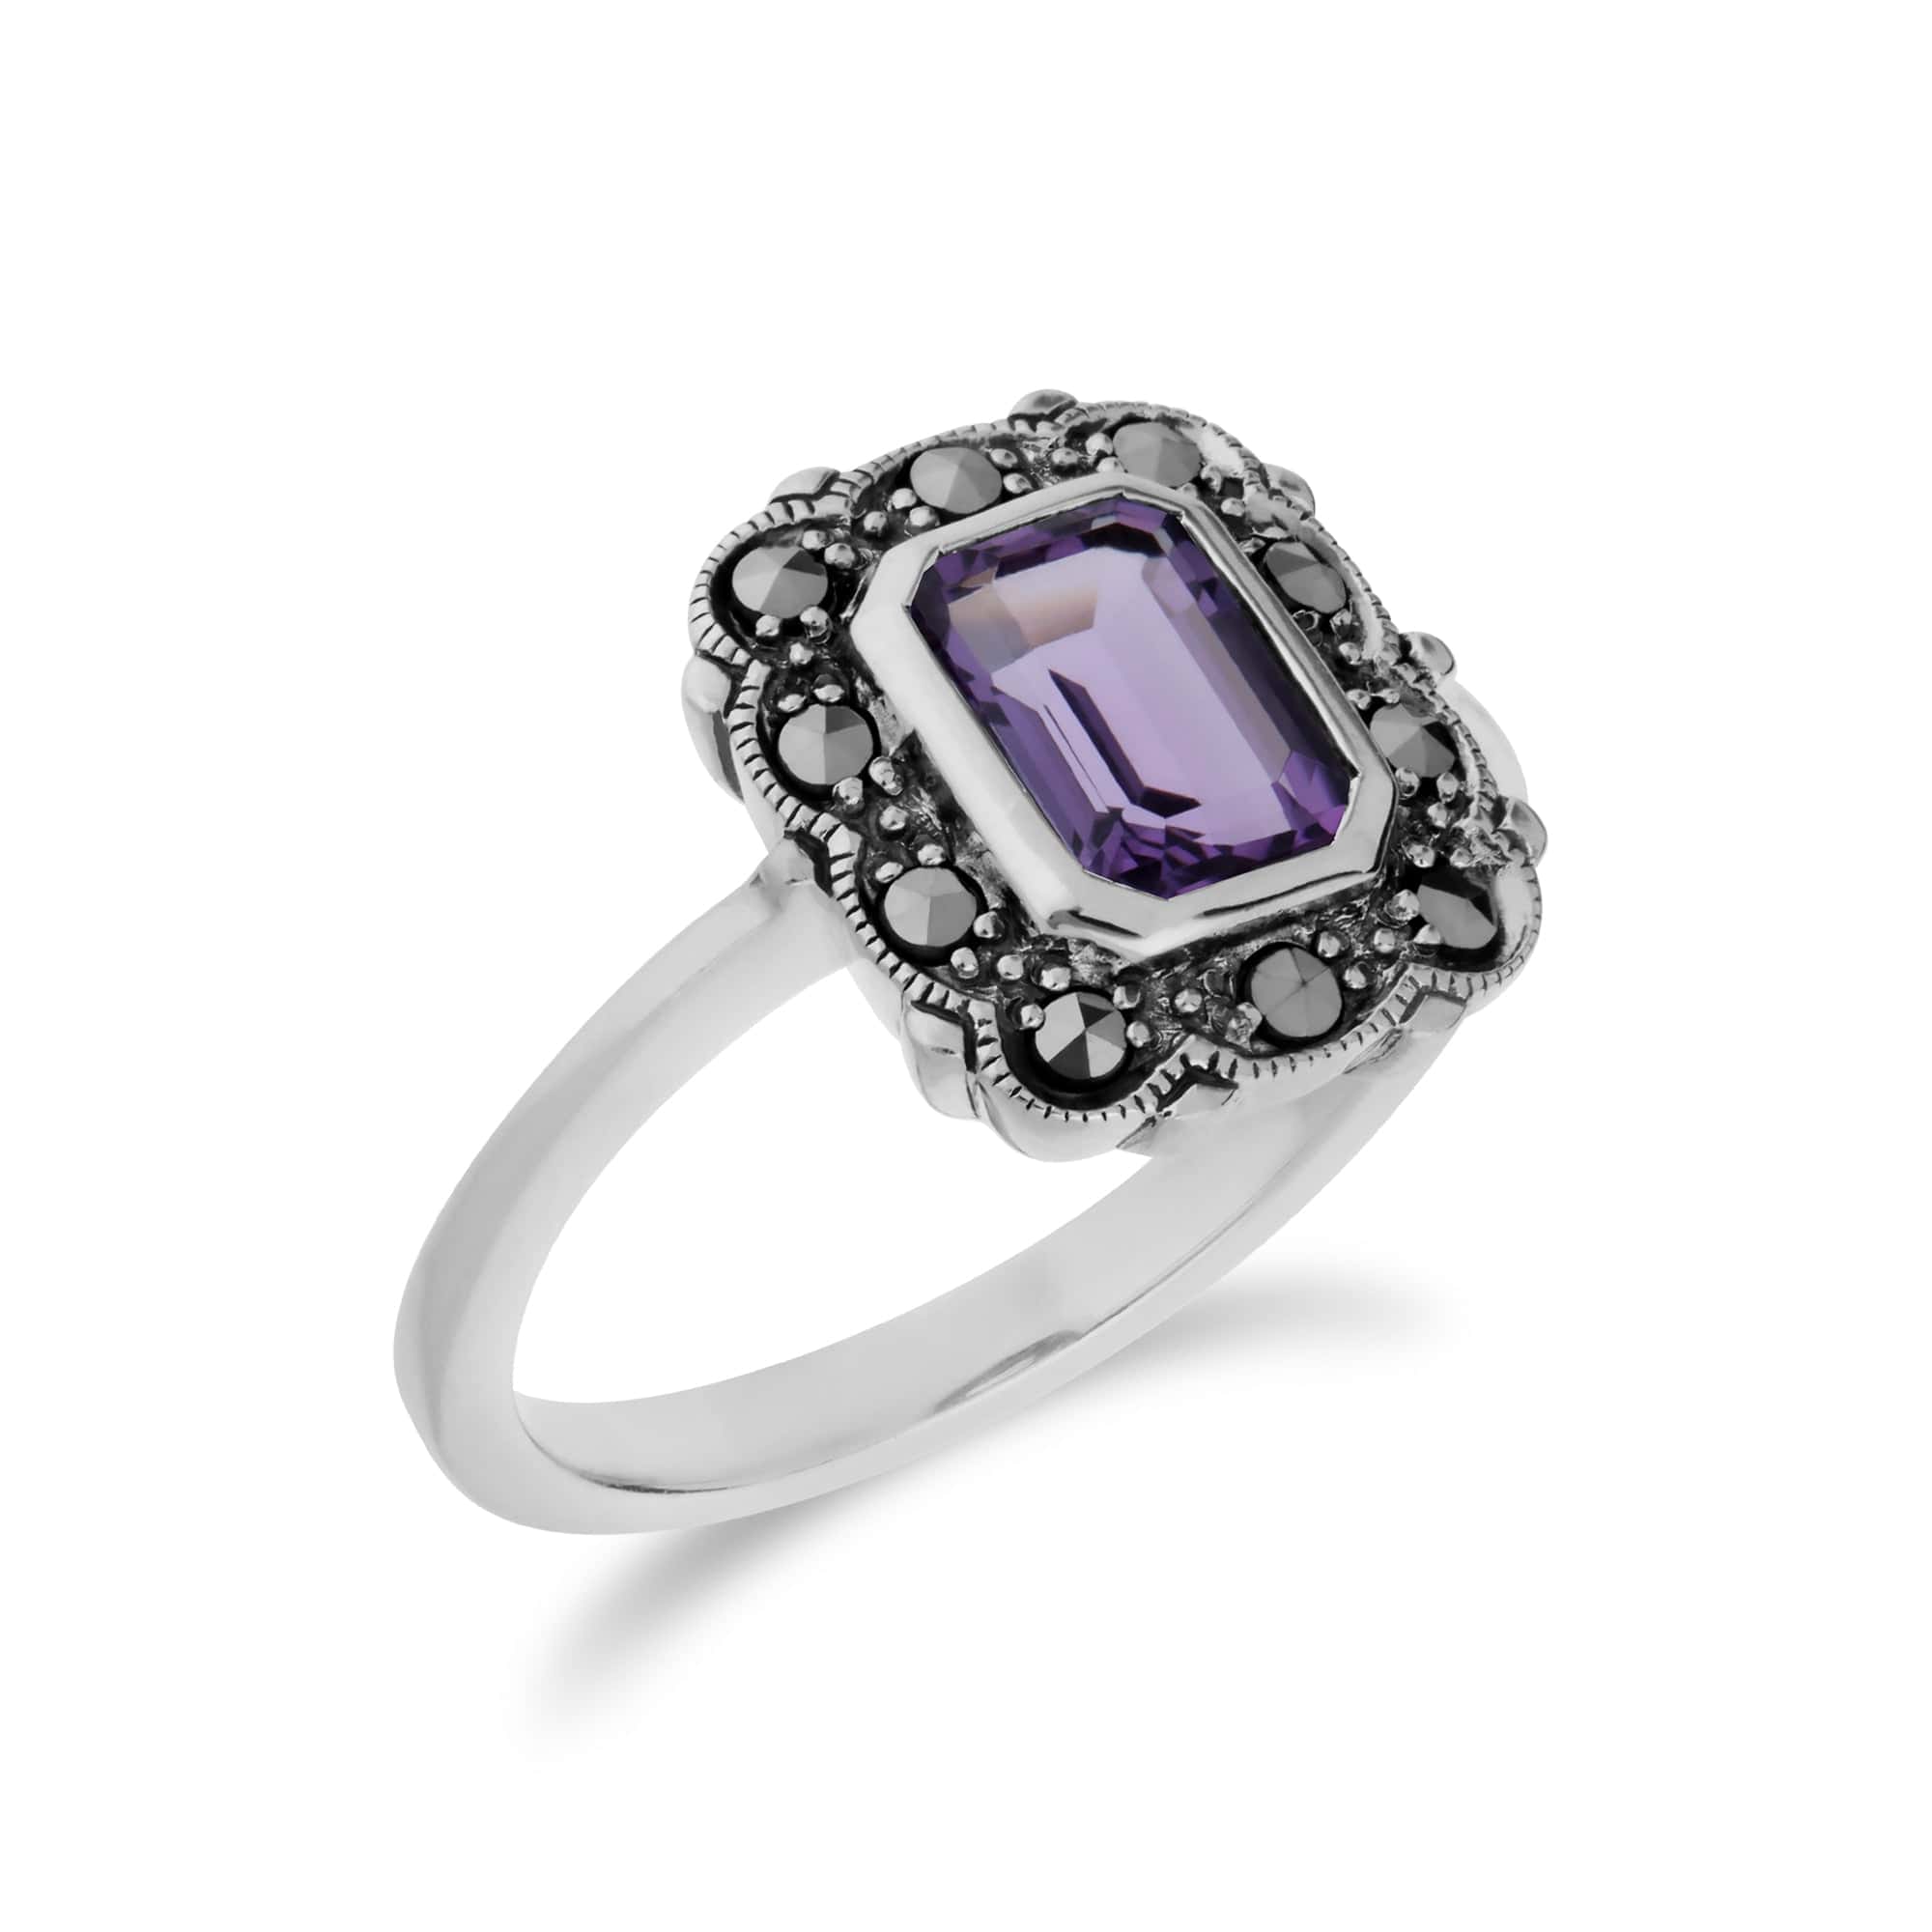 214R597102925 Art Nouveau Style Octagon Amethyst & Marcasite Border Ring in 925 Sterling Silver 2